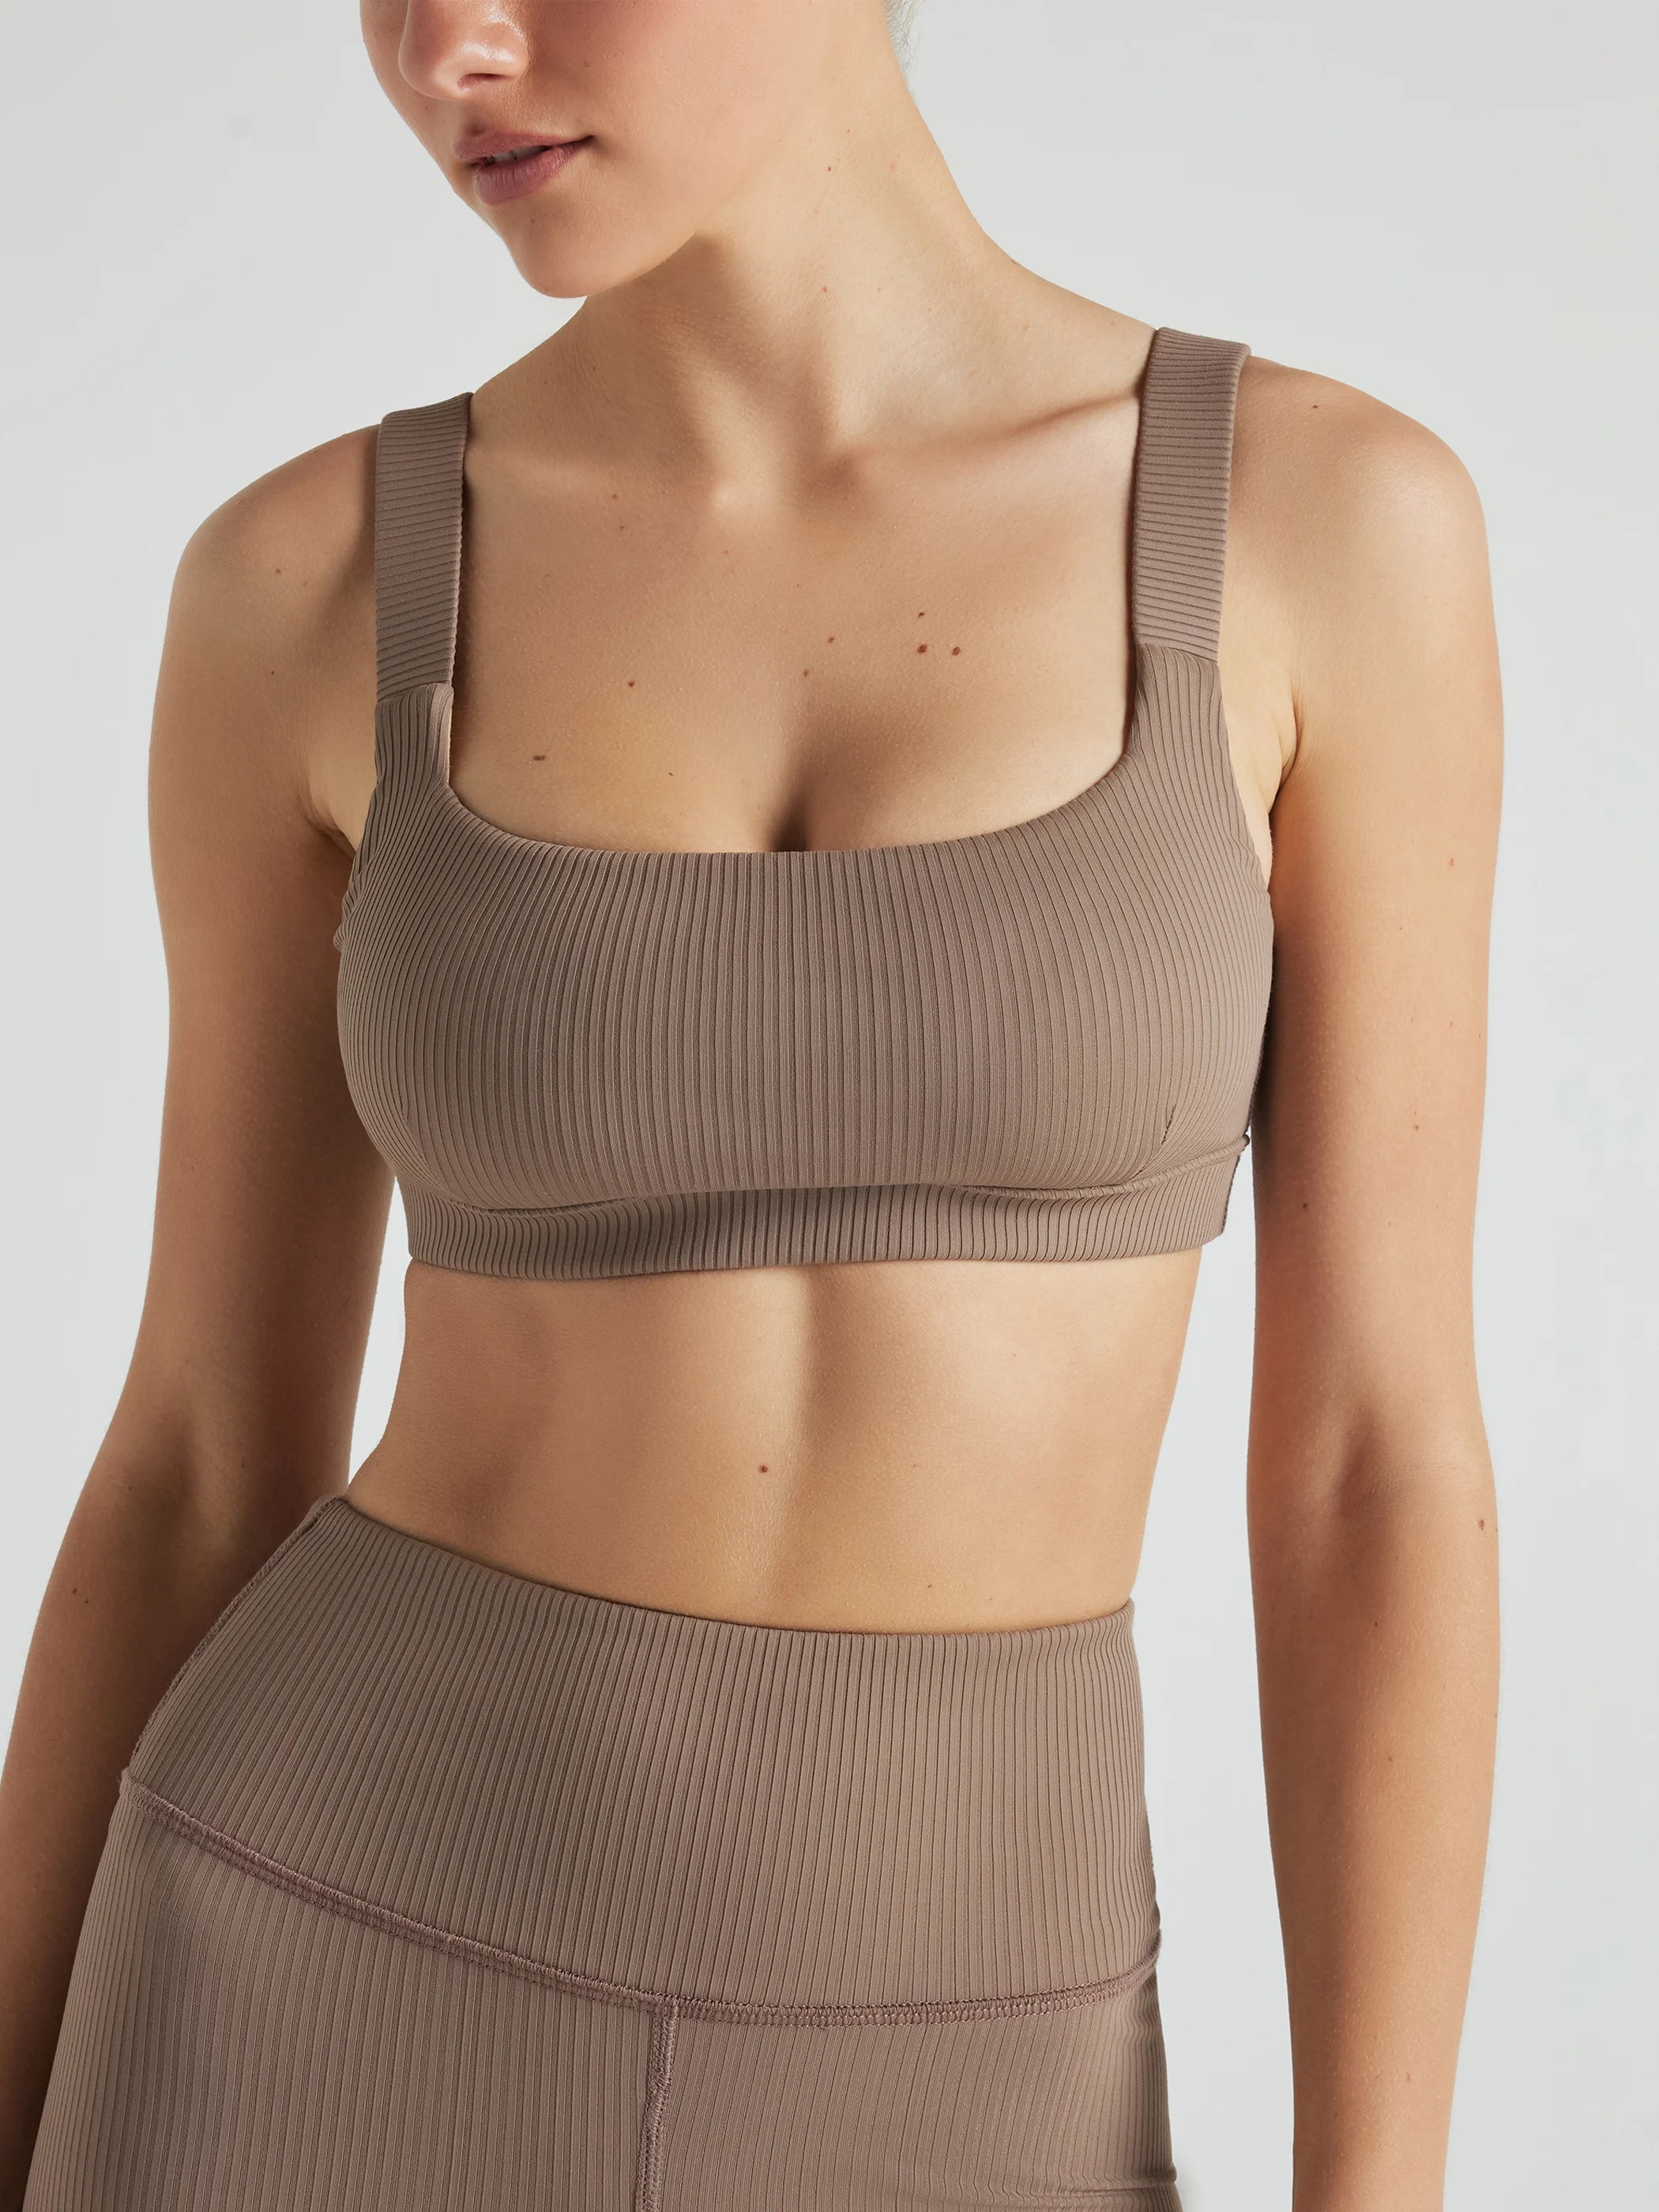 Free People Movement Square Neck Good Karma Sports Bra Top - ALL COLORS